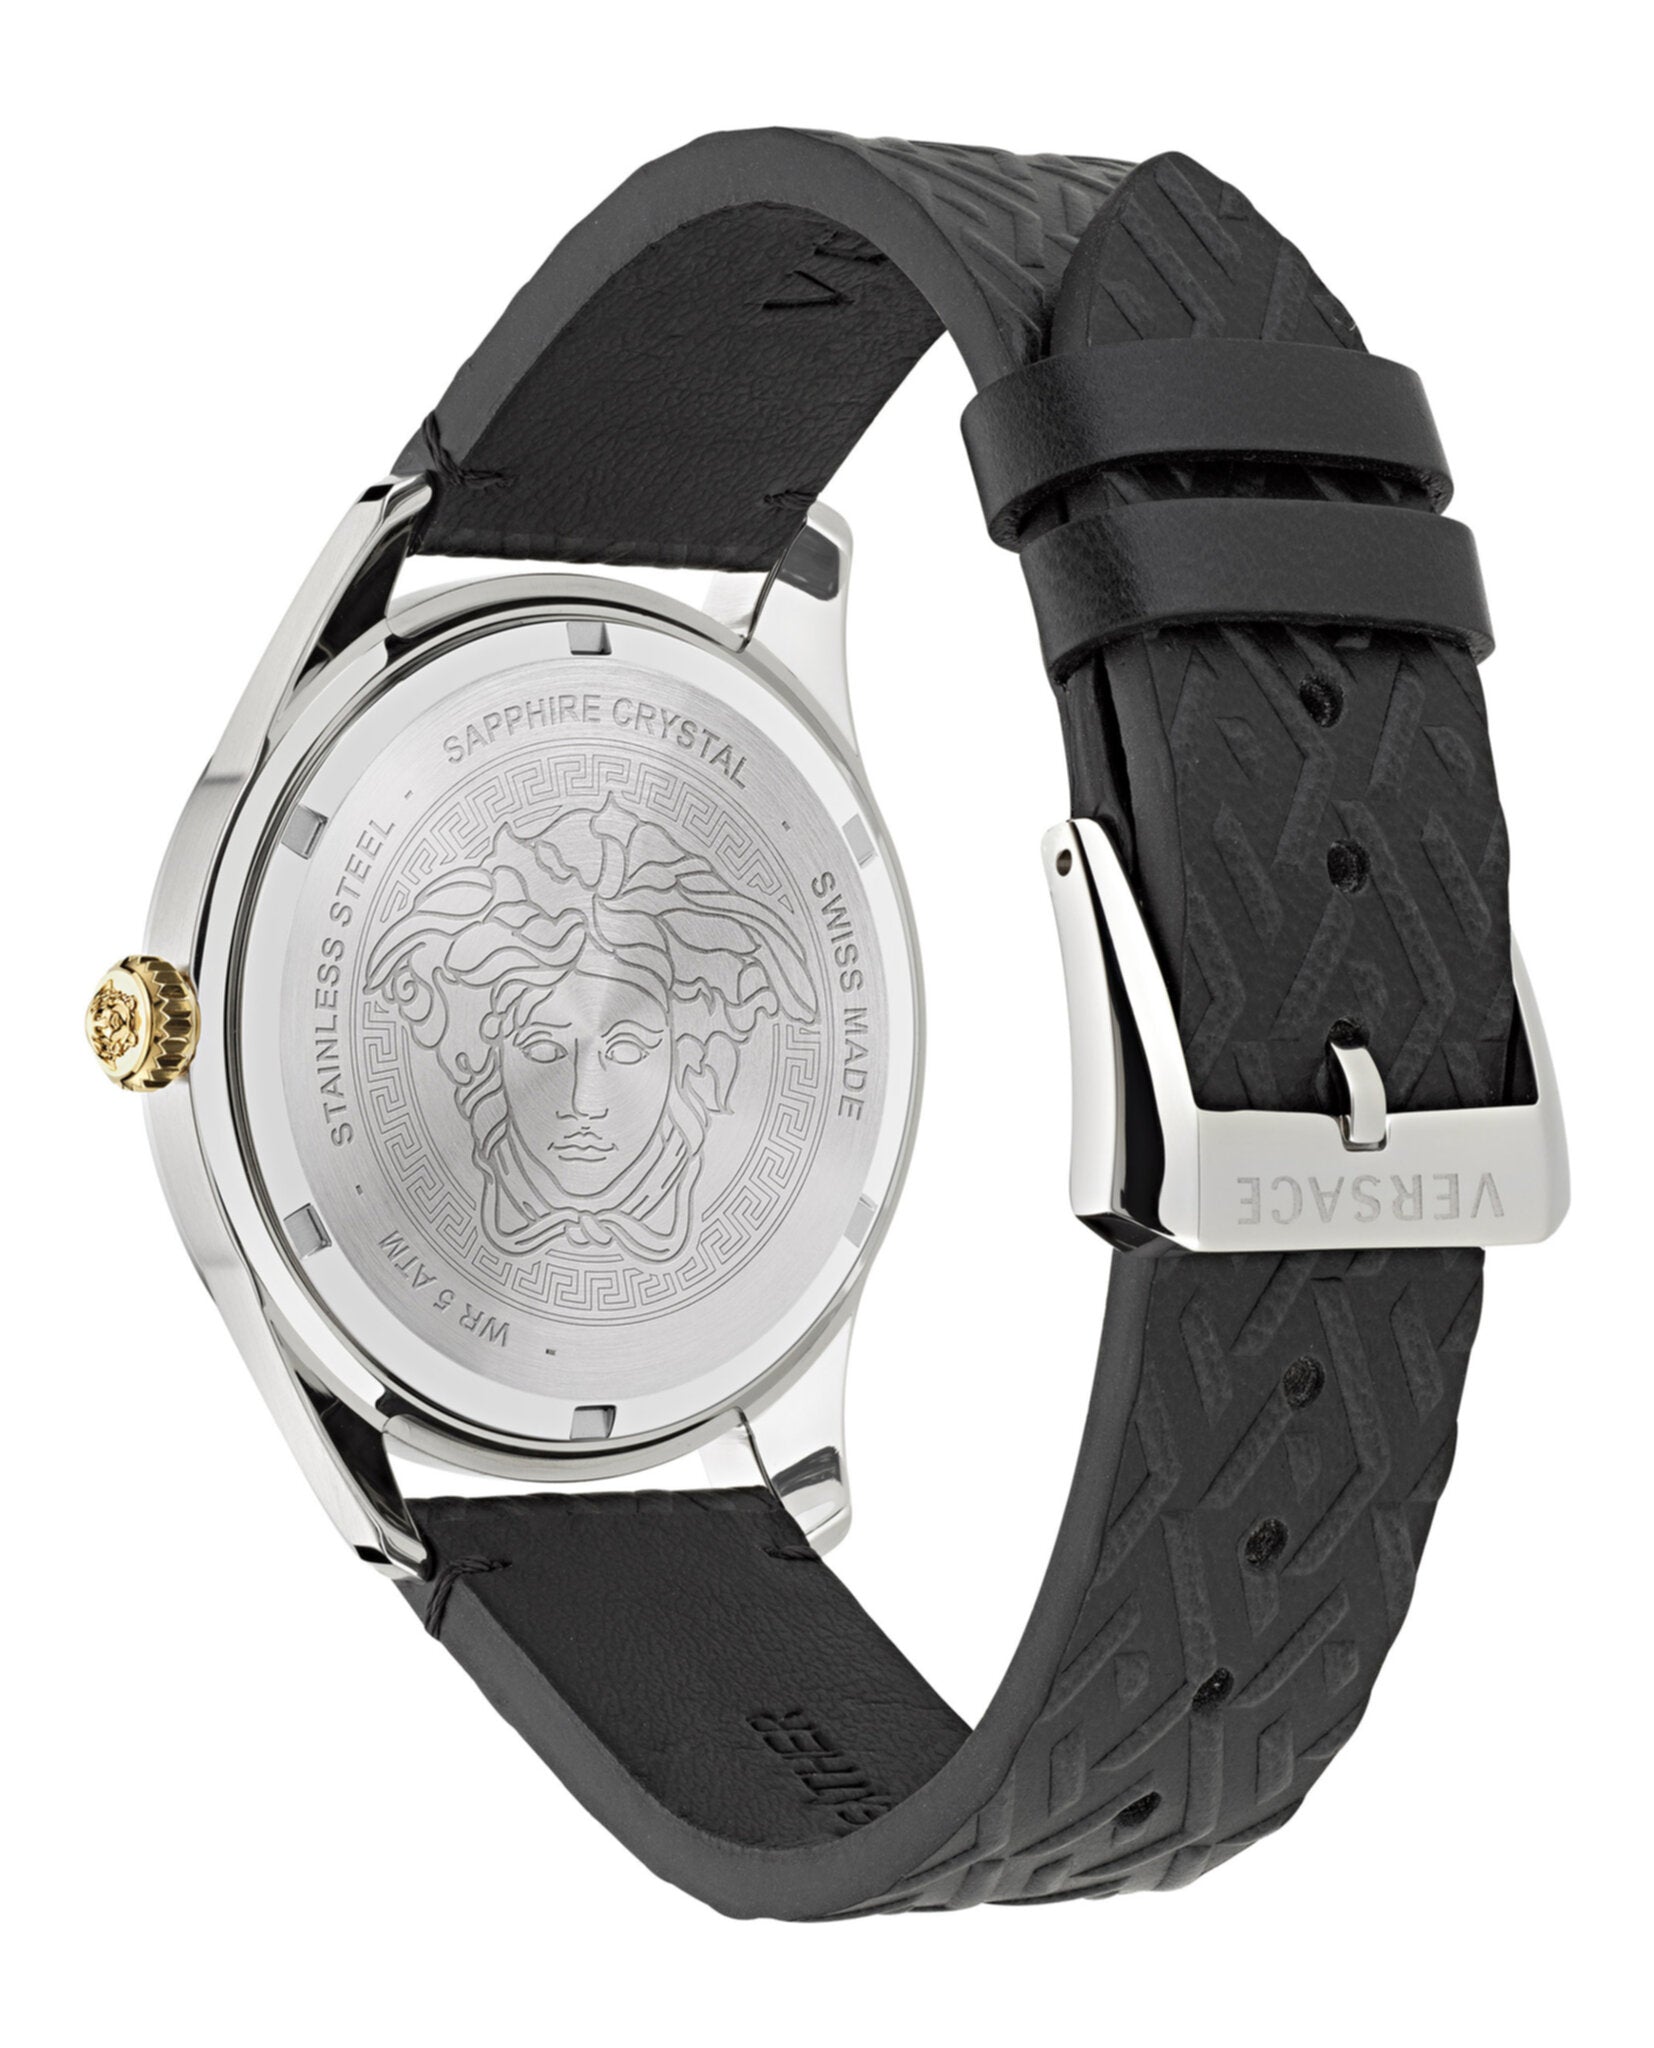 Versace Mens Greca Time Watches | MadaLuxe Time – Madaluxe Time